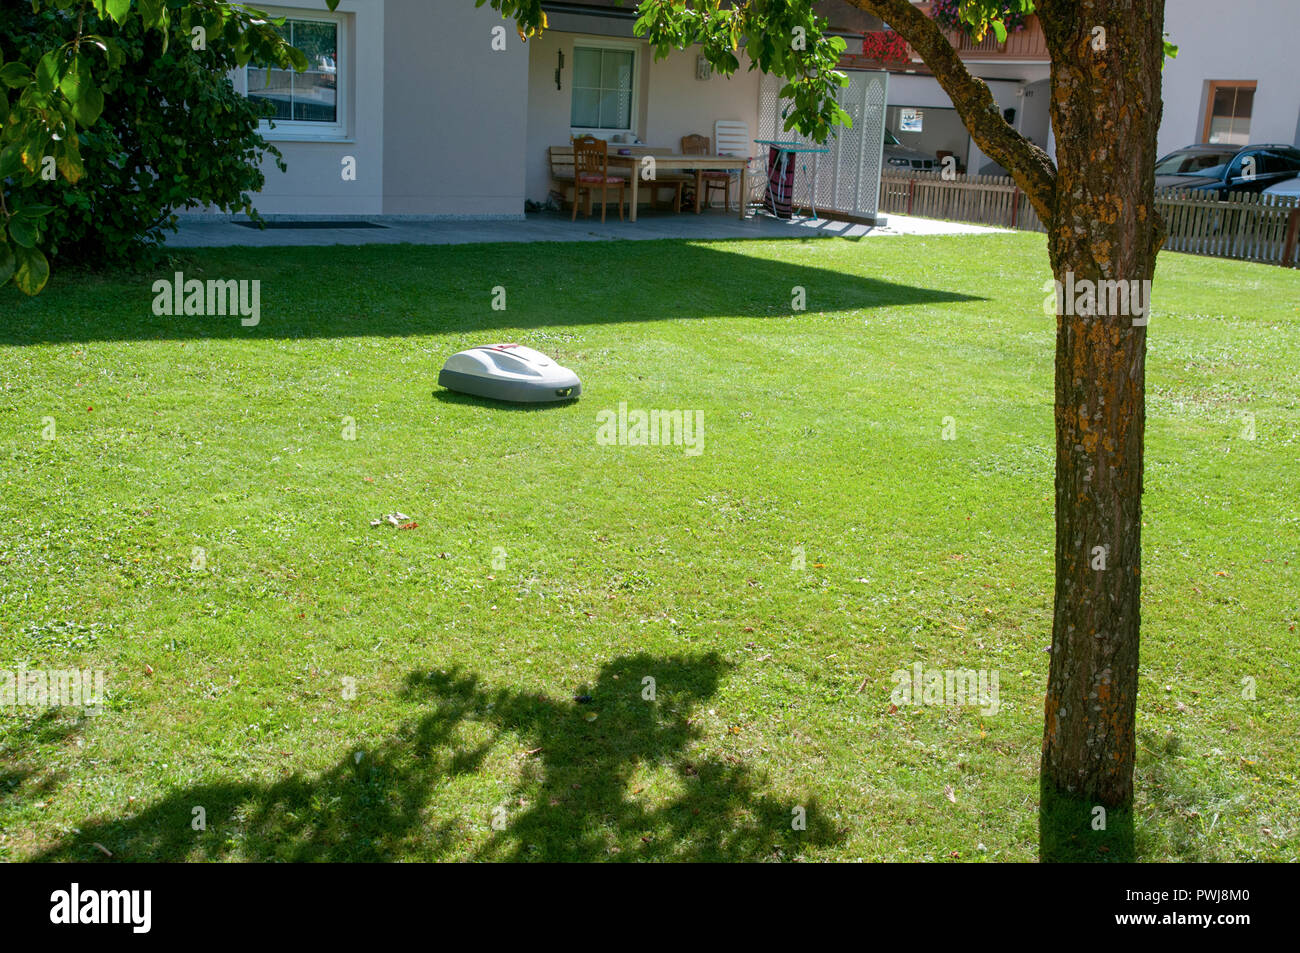 battery powered robotic lawn mower cutting grass Stock Photo